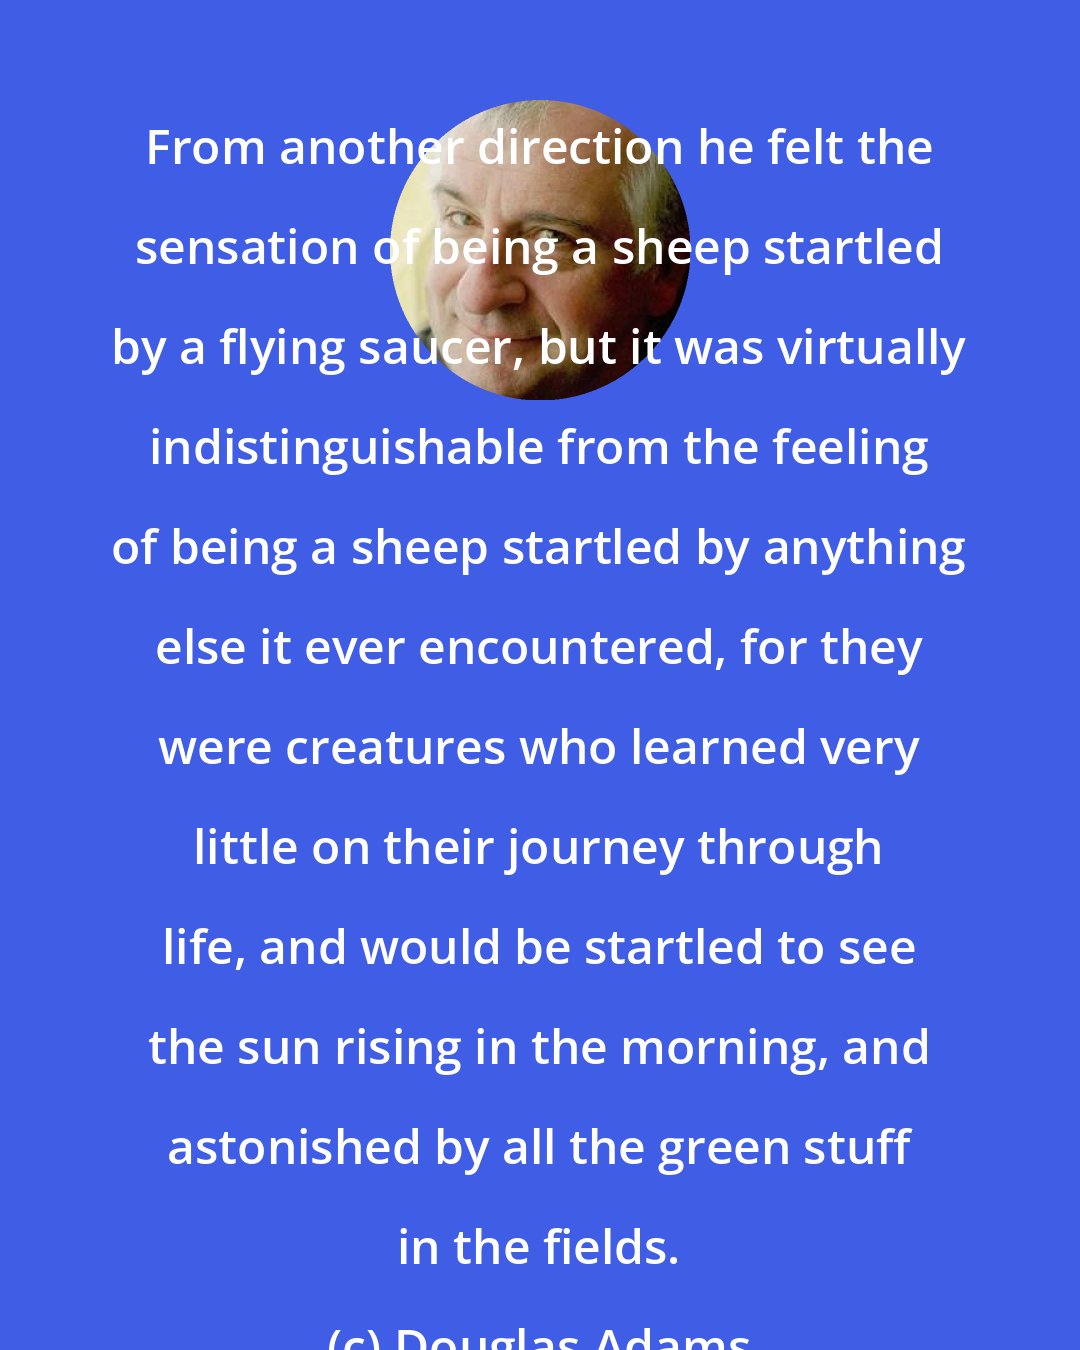 Douglas Adams: From another direction he felt the sensation of being a sheep startled by a flying saucer, but it was virtually indistinguishable from the feeling of being a sheep startled by anything else it ever encountered, for they were creatures who learned very little on their journey through life, and would be startled to see the sun rising in the morning, and astonished by all the green stuff in the fields.